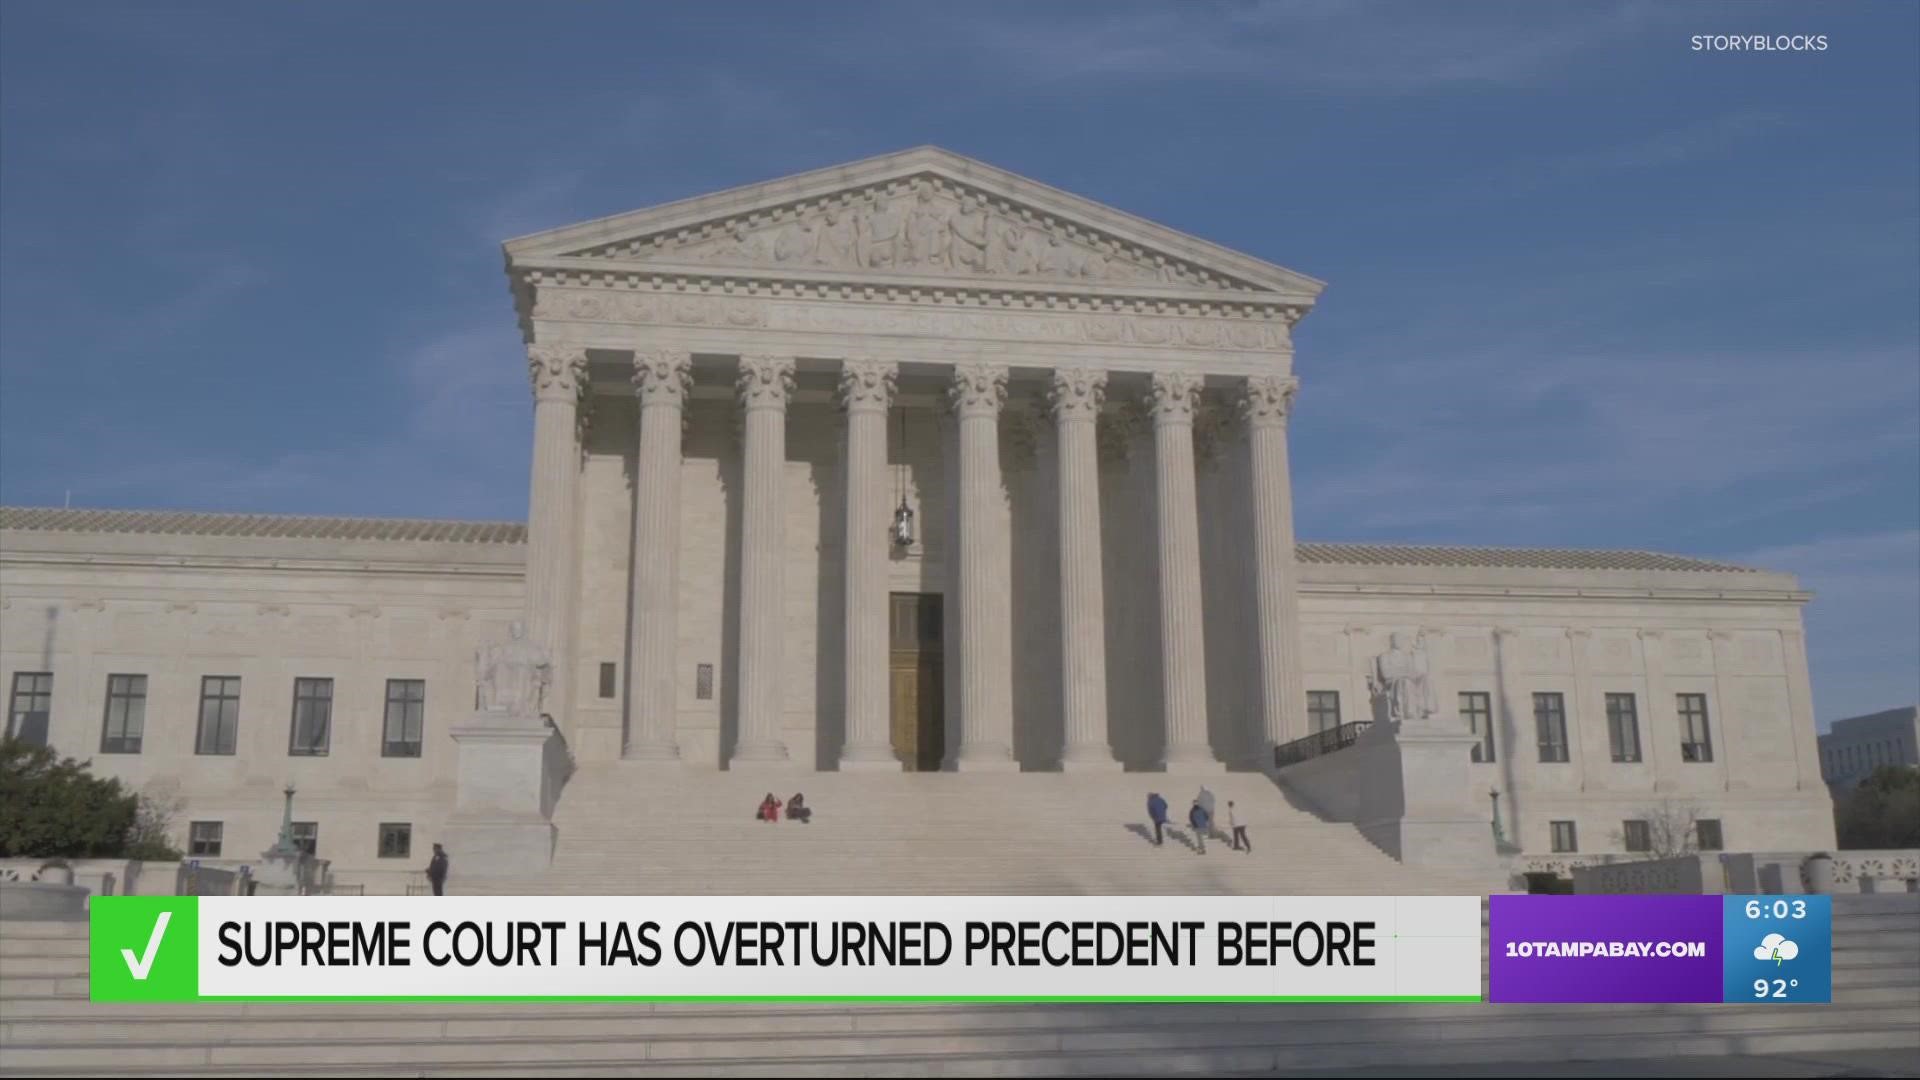 According to historical records, the Supreme Court has overturned more than 100 decisions to set new precedents.